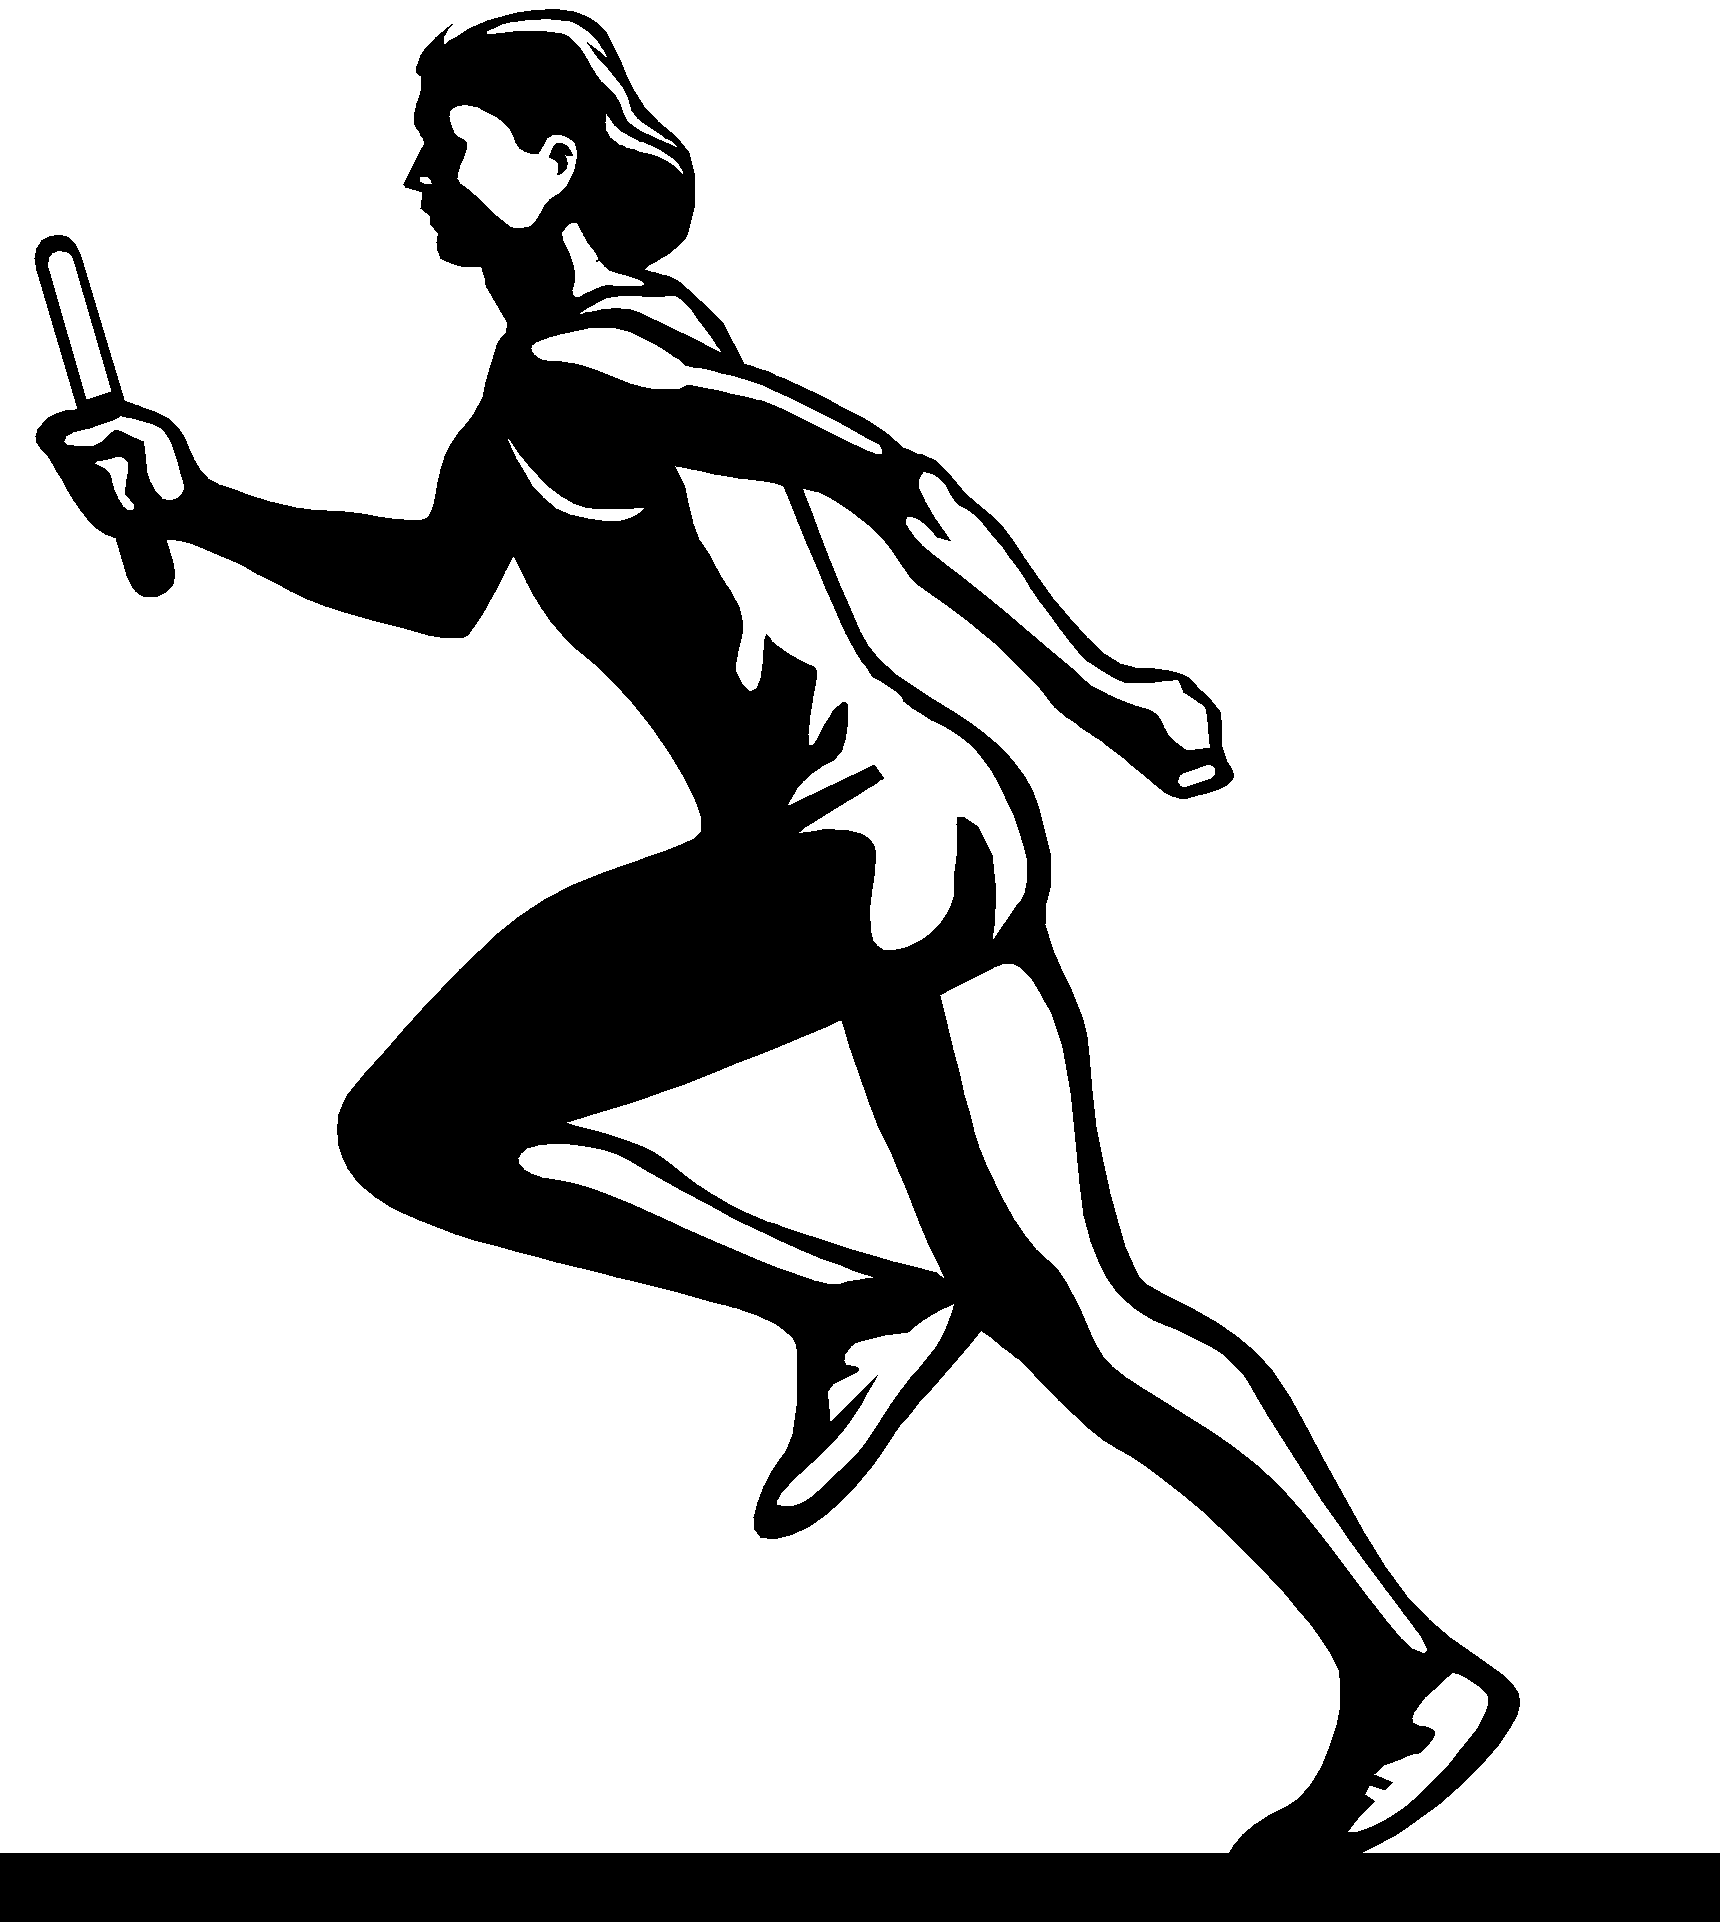 Track and field clip art the  - Track And Field Clip Art